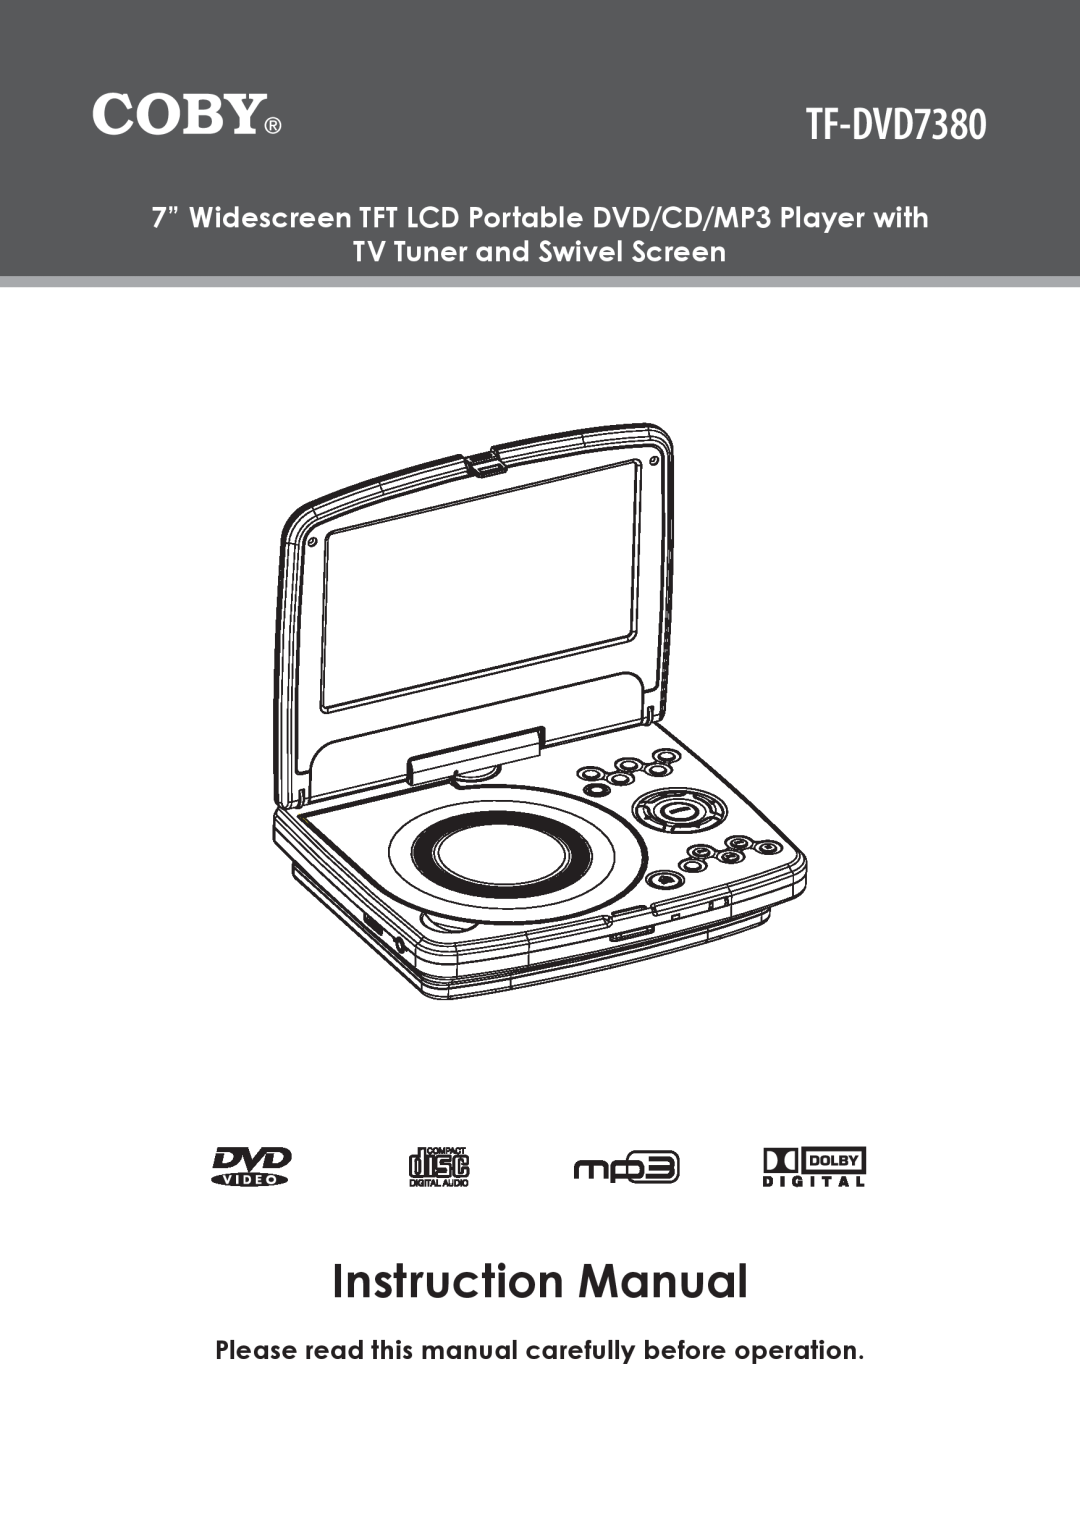 COBY electronic TF-DVD7380 instruction manual 7” Widescreen TFT LCD Portable DVD/CD/MP3 Player with, Instruction Manual 